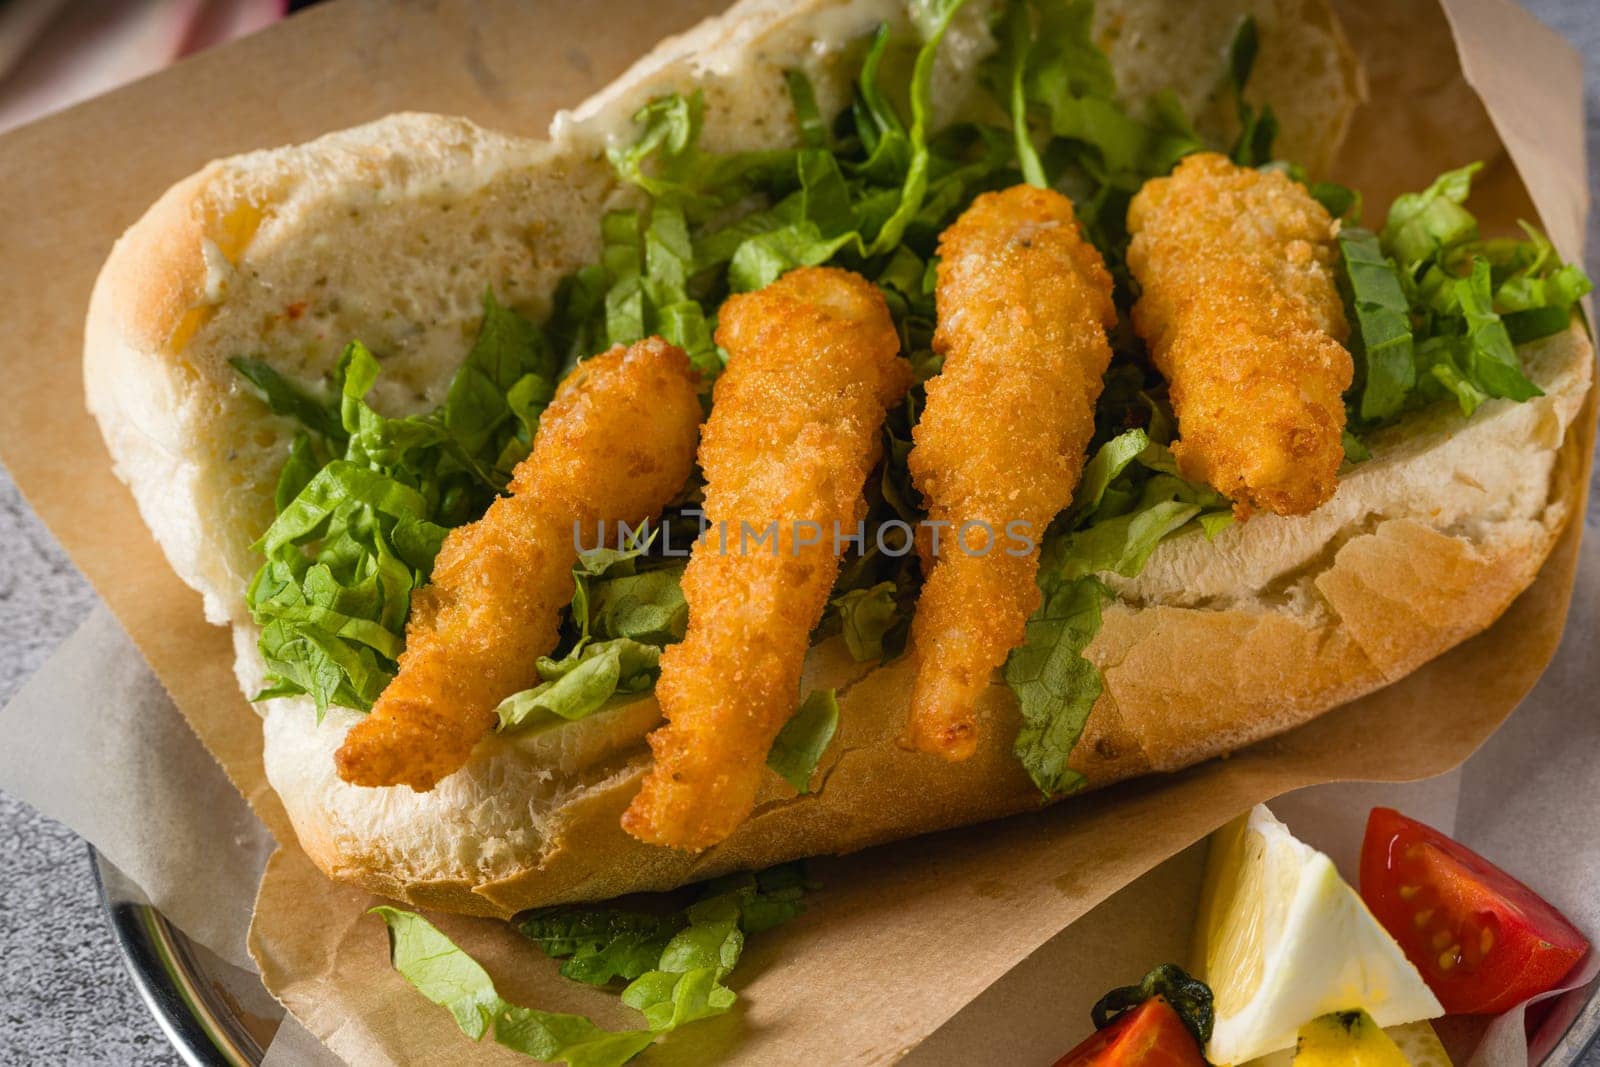 Deep fried shrimp in bread with greens on the side. Shrimp sandwich